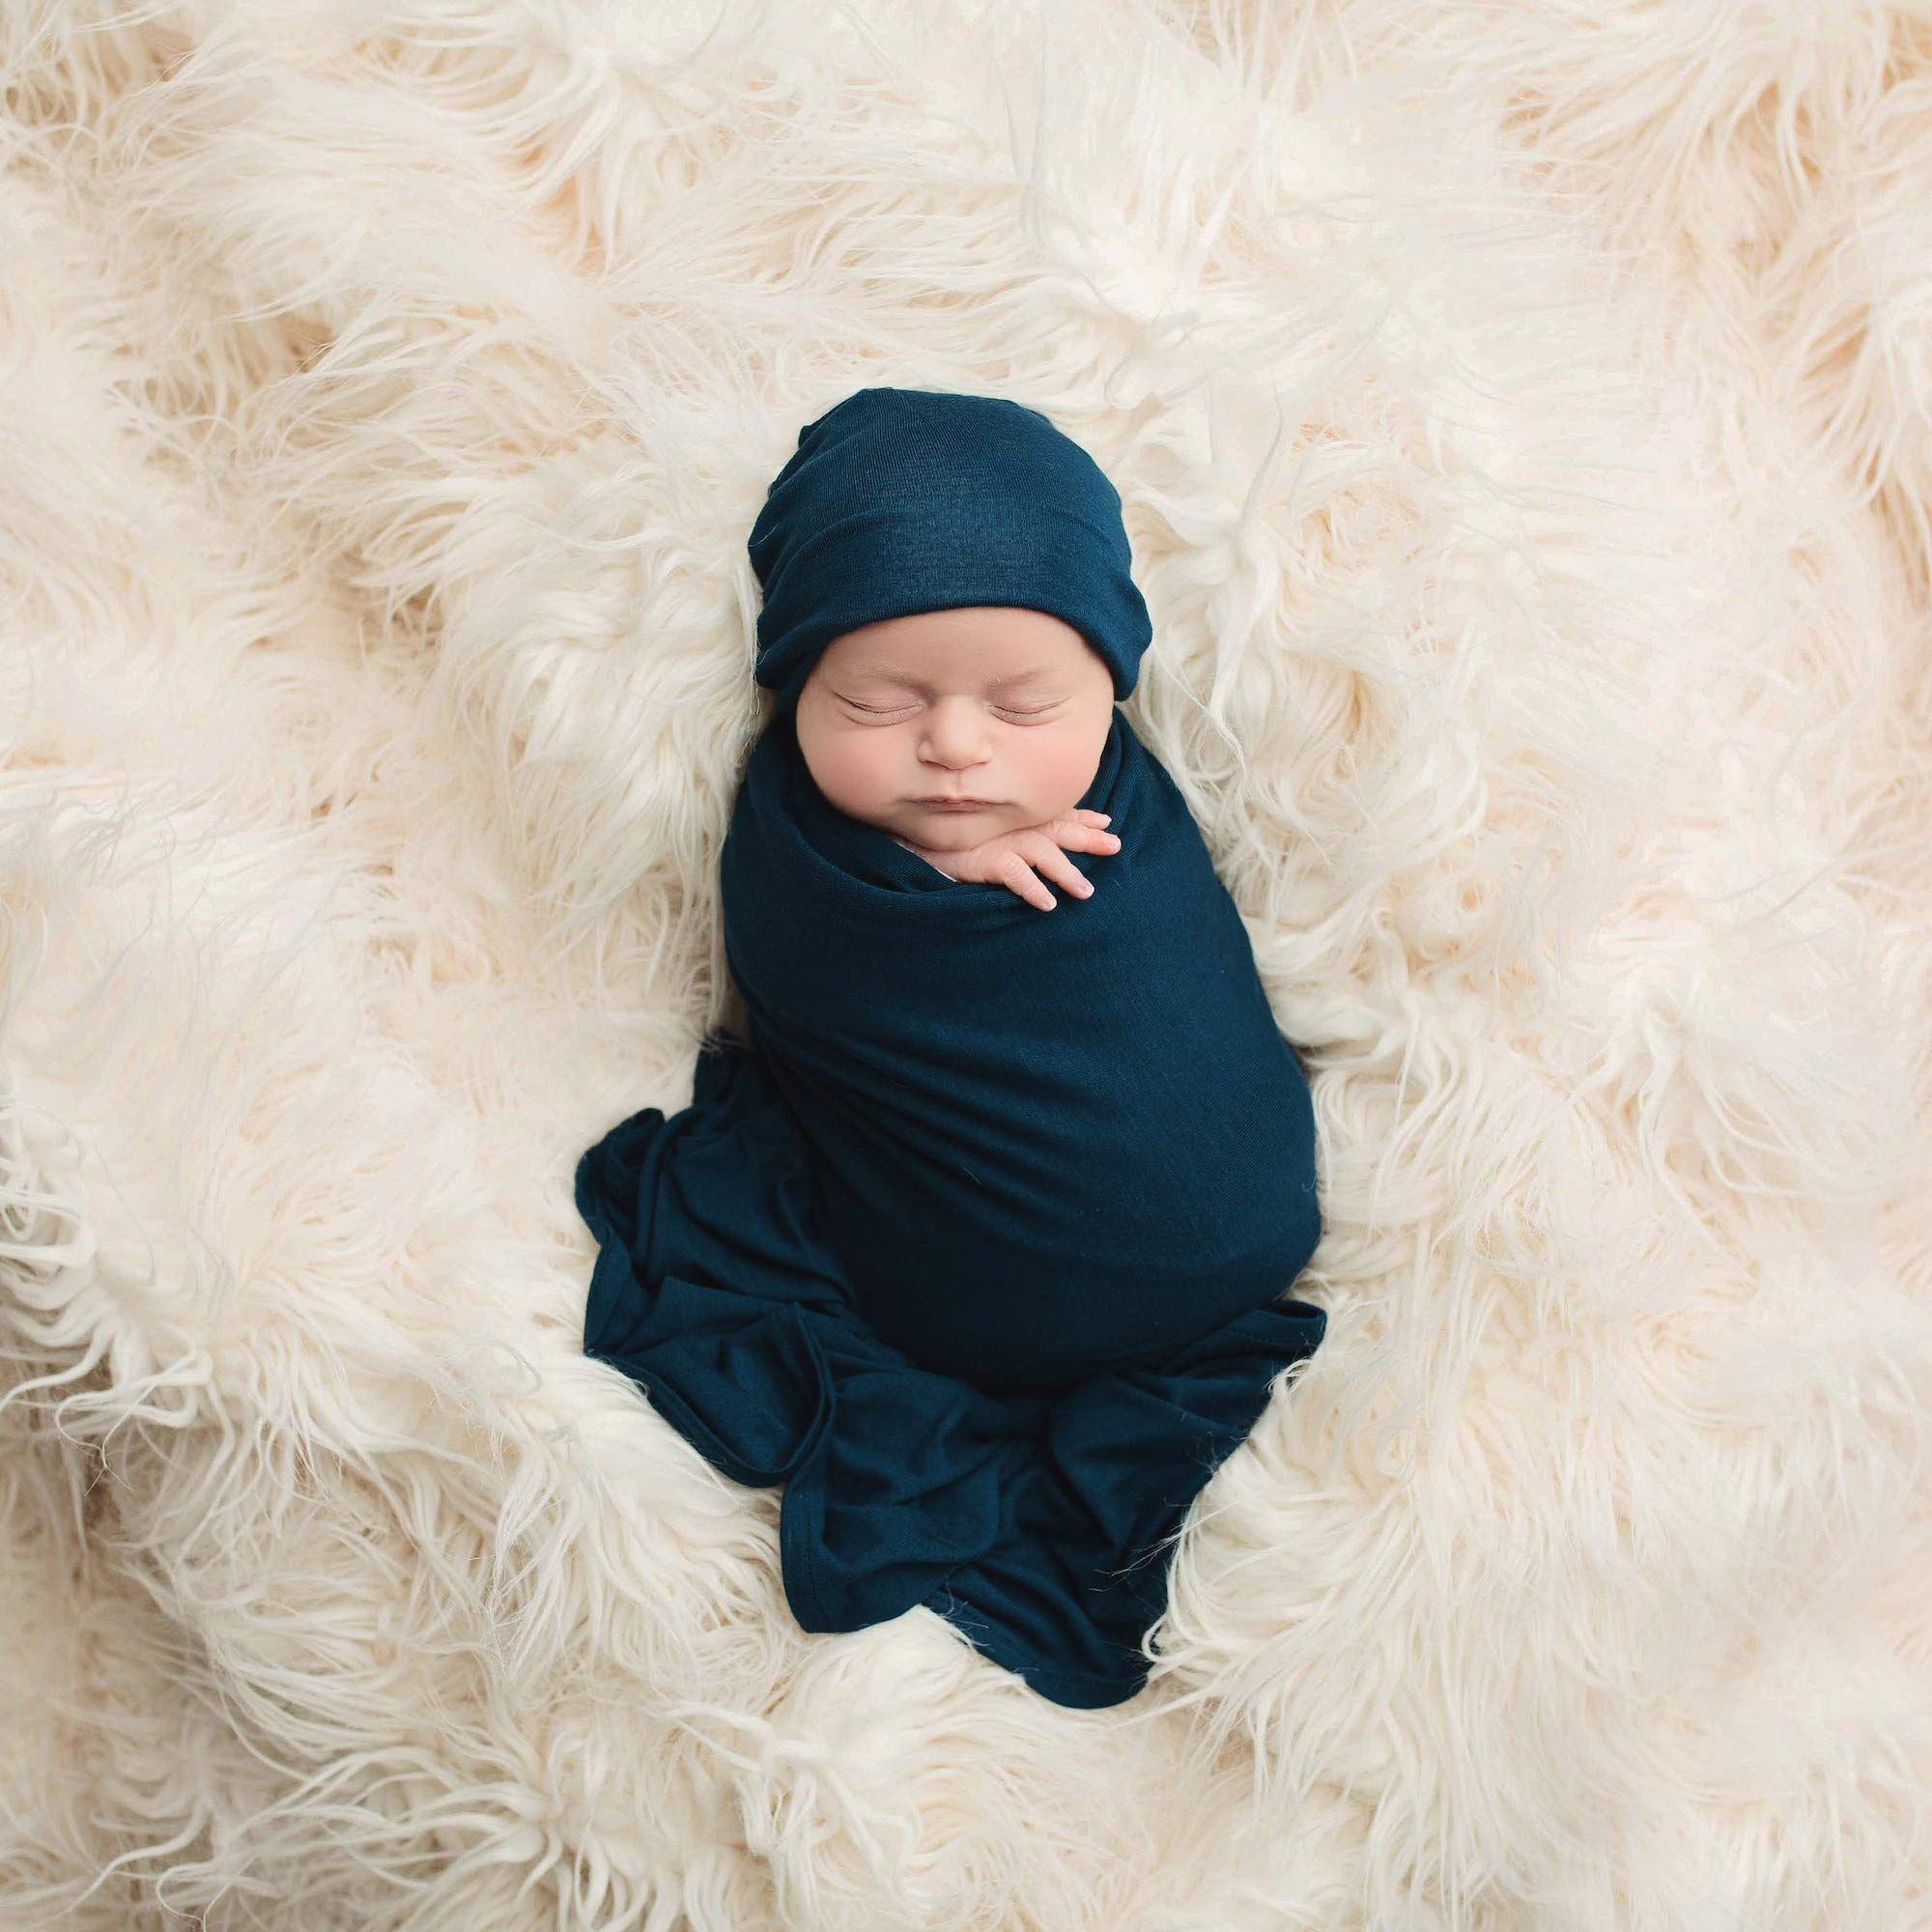 Best Gifts for Newborn Babies-Snuggle Hunny